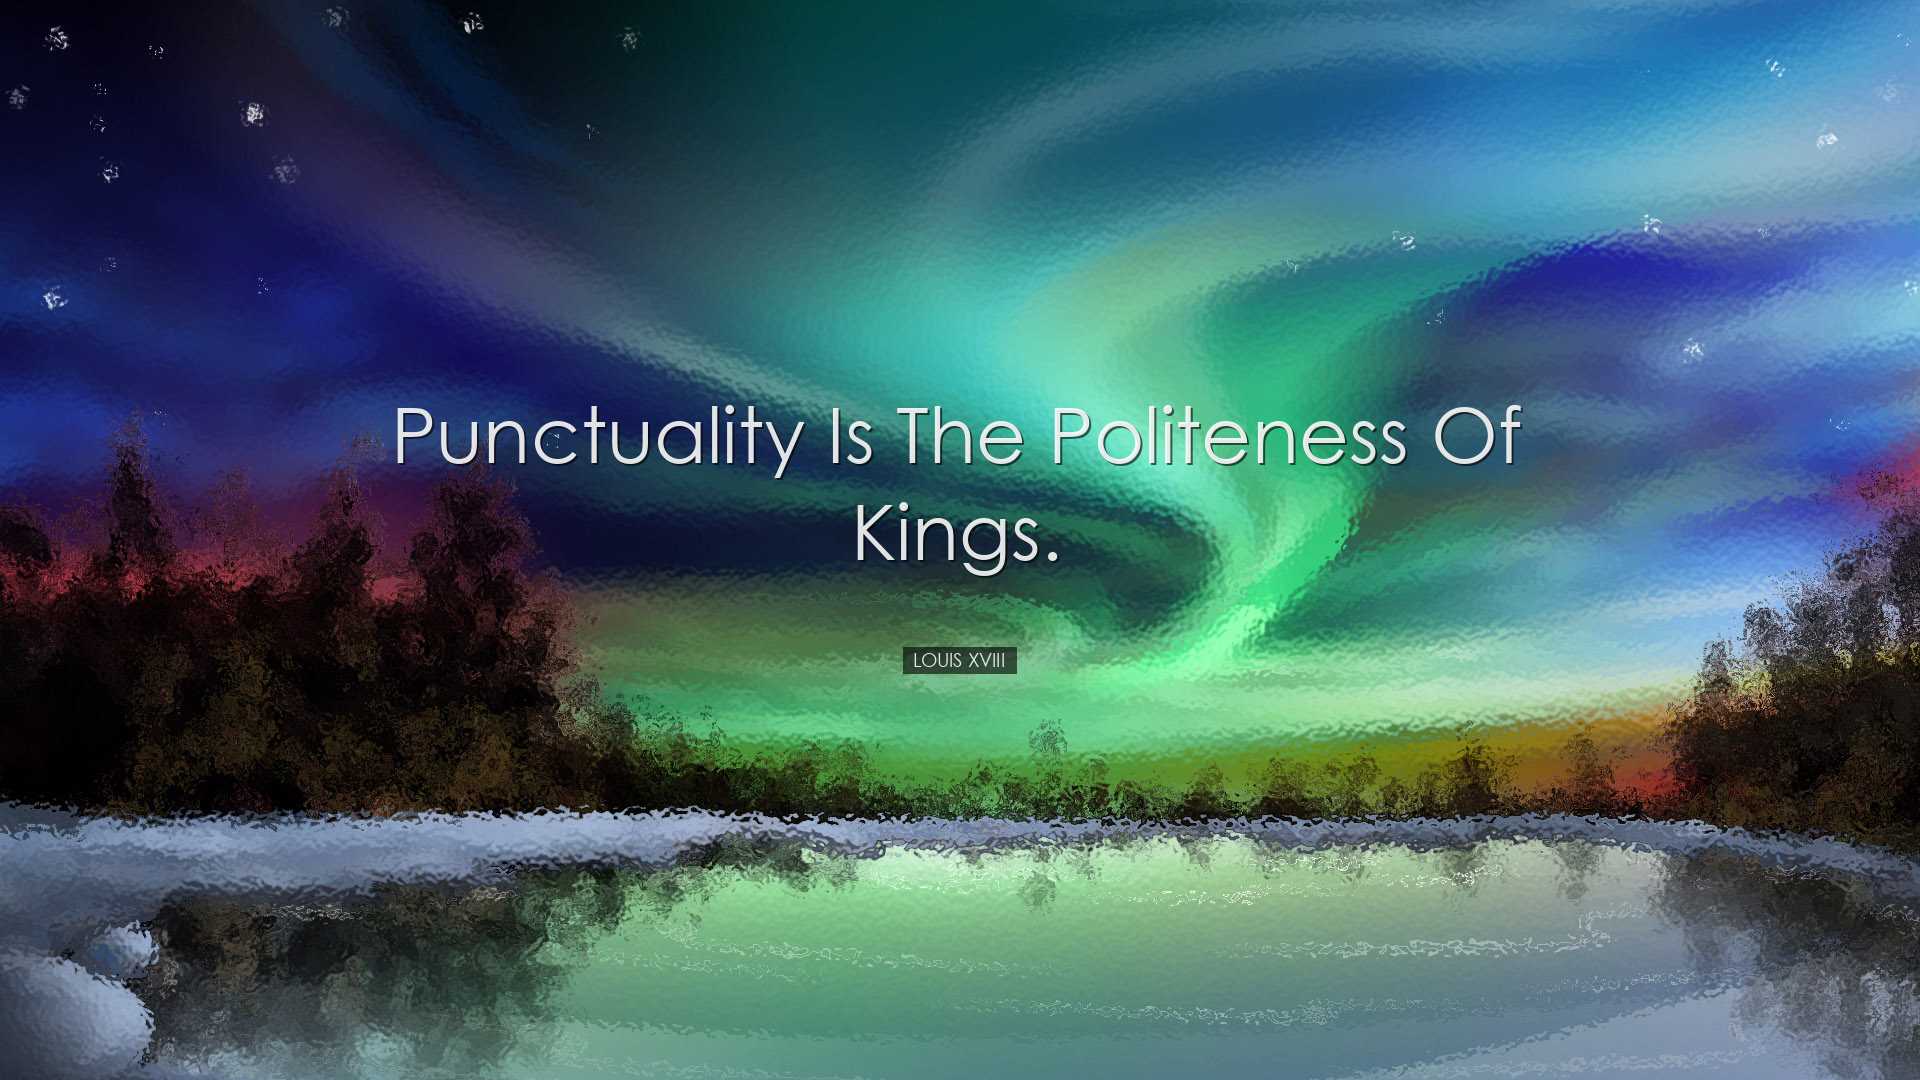 Punctuality is the politeness of kings. - Louis XVIII